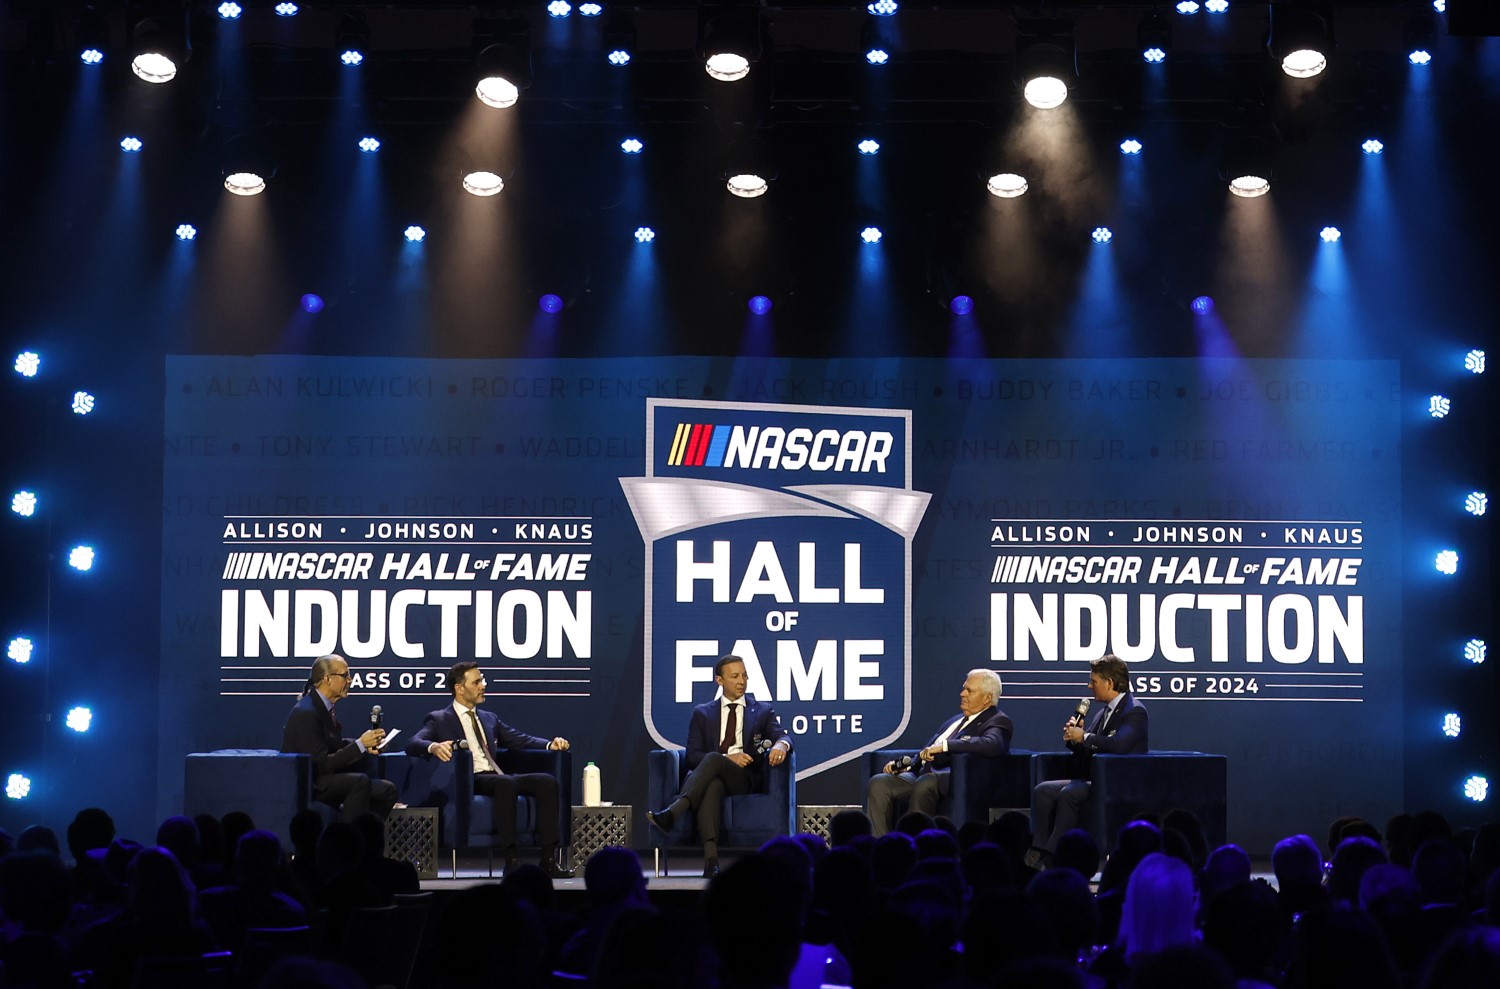 L-R) Host, Kyle Petty, NASCAR Hall of Fame inductees, Jimmie Johnson, and Chad Knaus and NASCAR Hall of Famers, Rick Hendrick and Jeff Gordon speak onstage during the 2024 NASCAR Hall of Fame Induction Ceremony at Charlotte Convention Center on January 19, 2024 in Charlotte, North Carolina. (Photo by Chris Graythen/Getty Images)